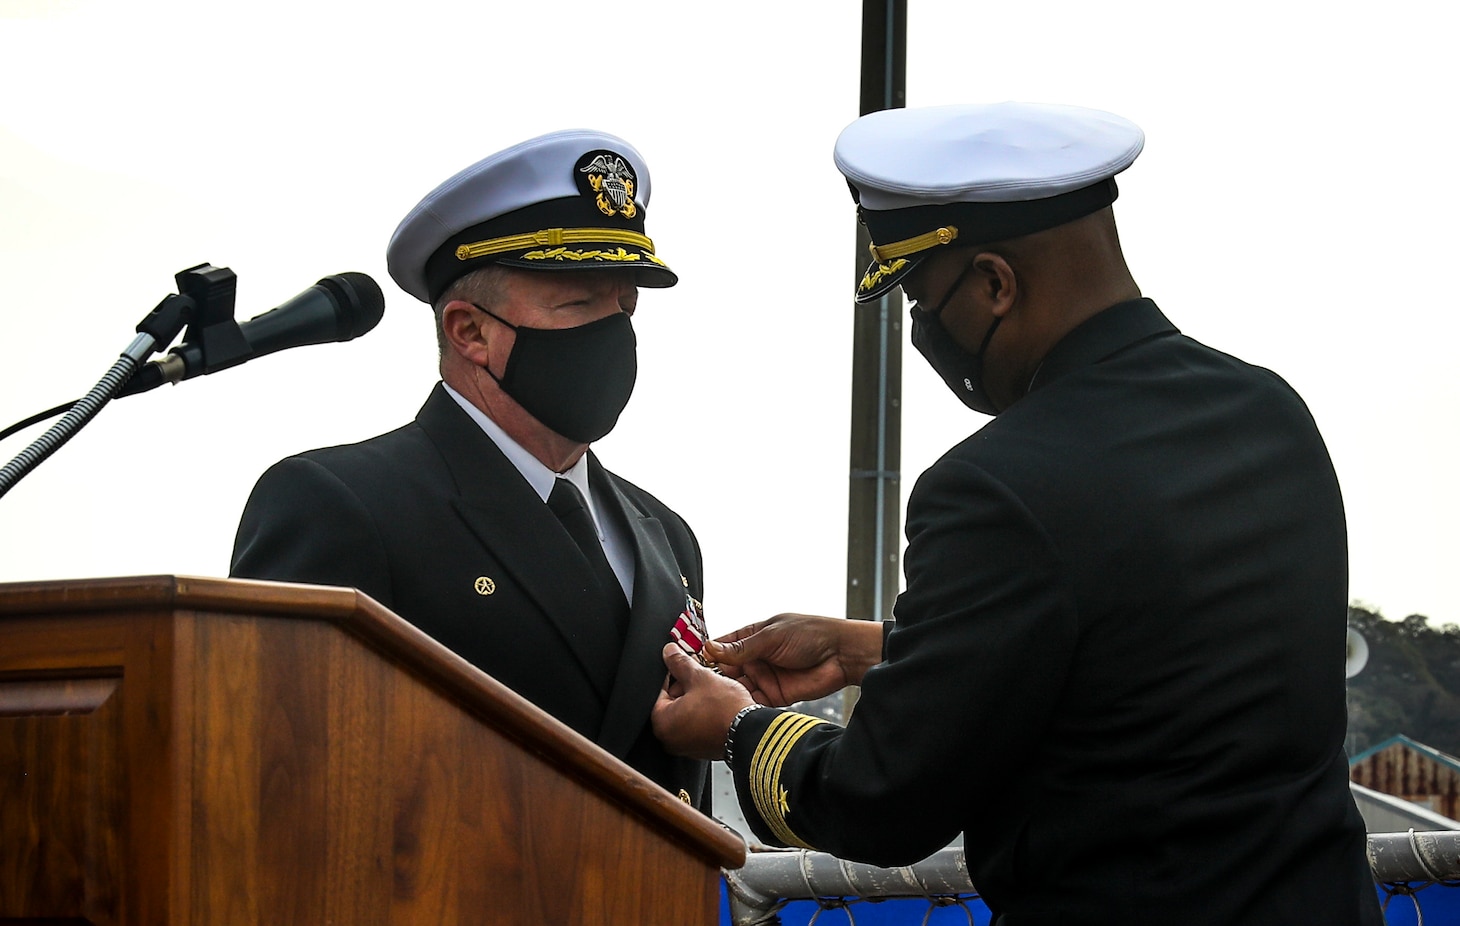 YOKOSUKA, Japan (March 19, 2021) Cmdr. Todd Penrod receives end of tour award from Capt. Walter Mainor during a change of command ceremony aboard the Arleigh-Burke class guided-missile destroyer USS Mustin (DDG 89) while in port at Naval Base Yokosuka. (US Navy photo by Mass Communication Specialist 3rd Class Arthur Rosen)